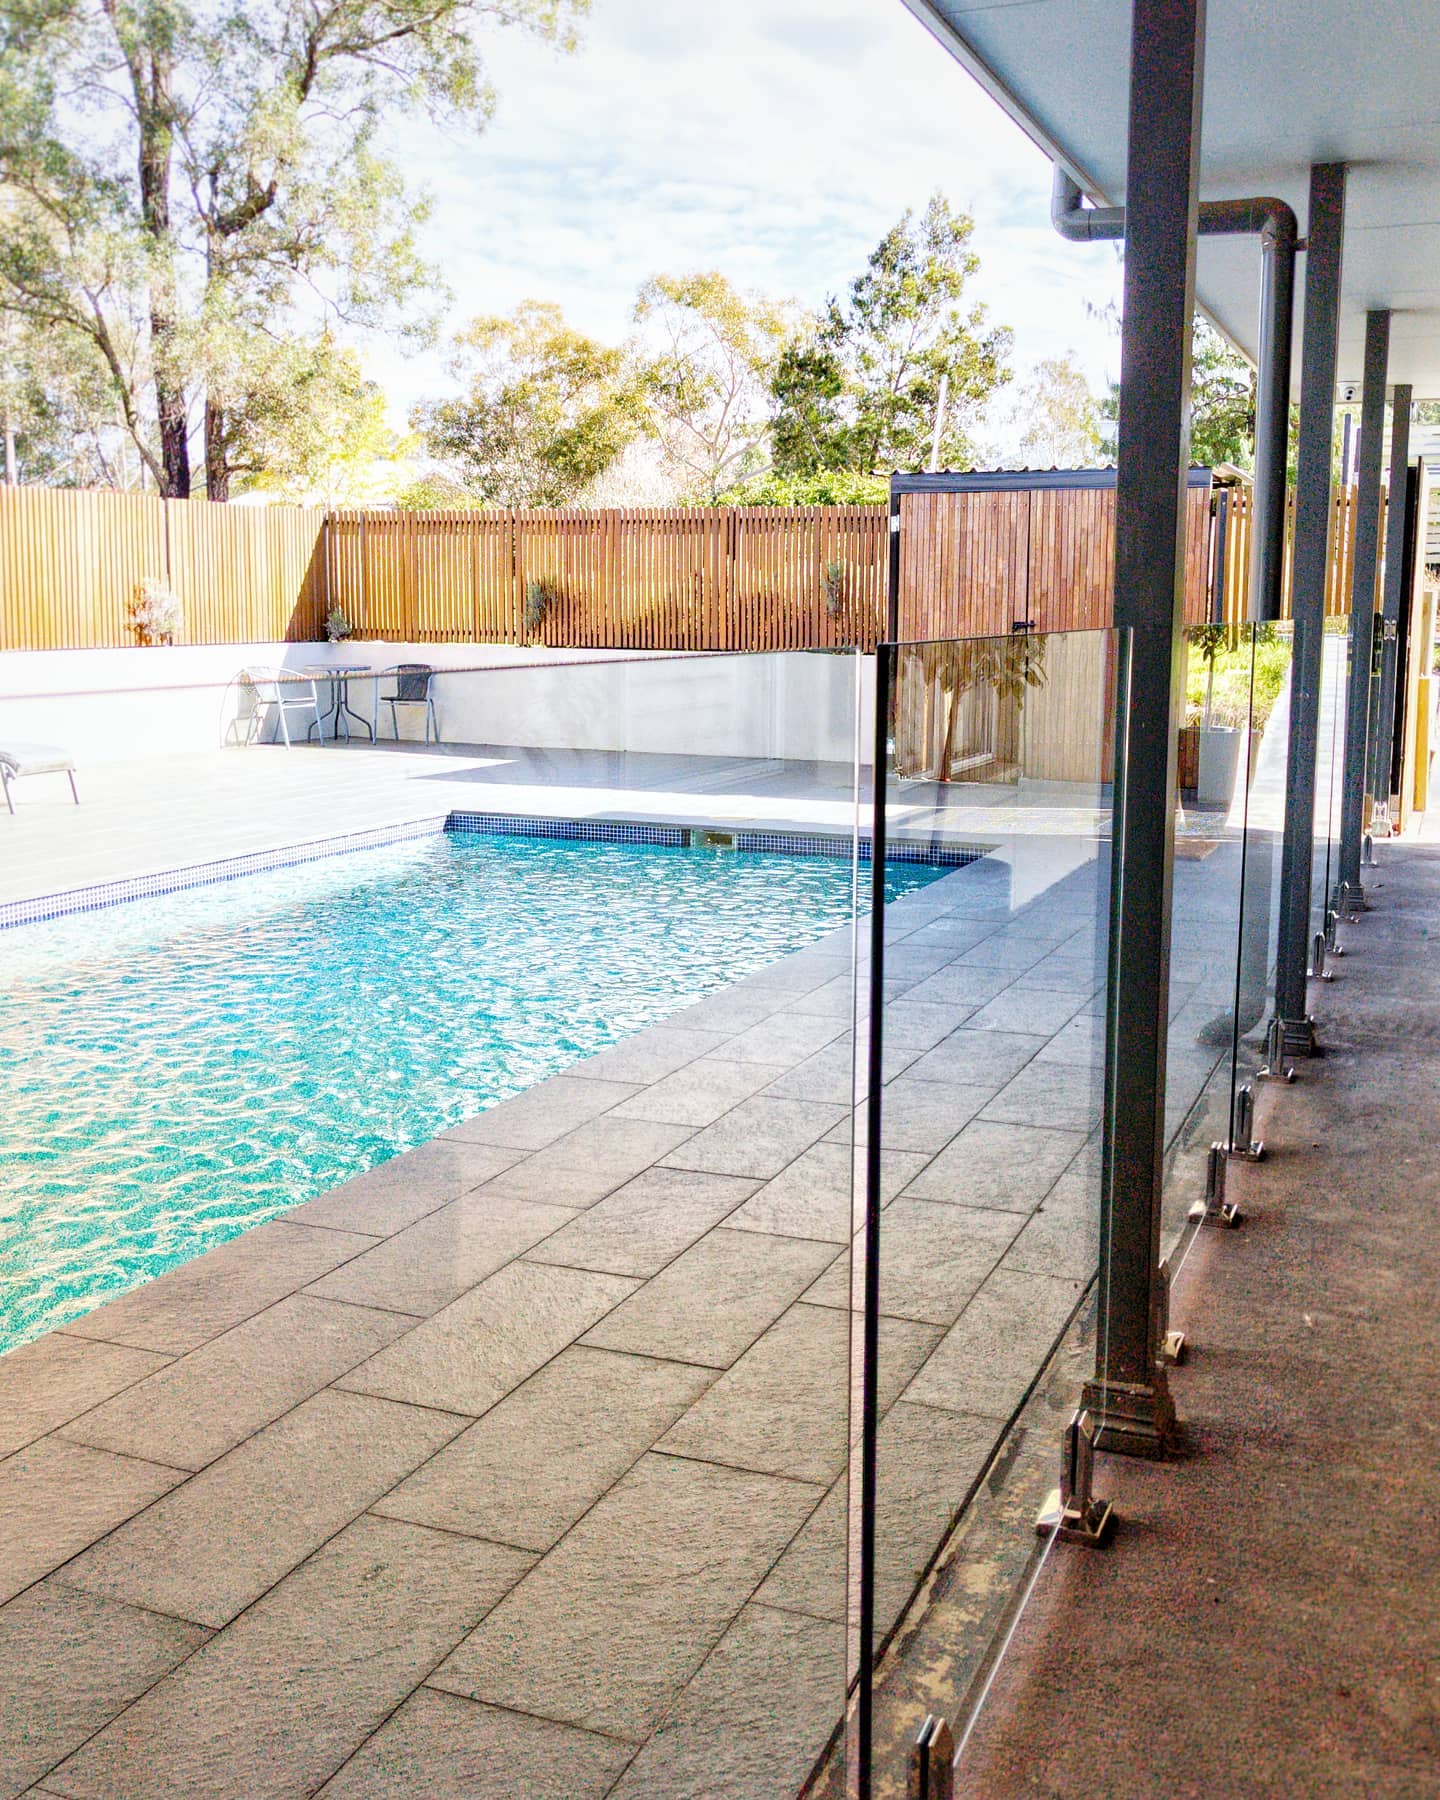 Cleaning Outdoor Tiles - Window Cleaning in Southern Highlands, NSW